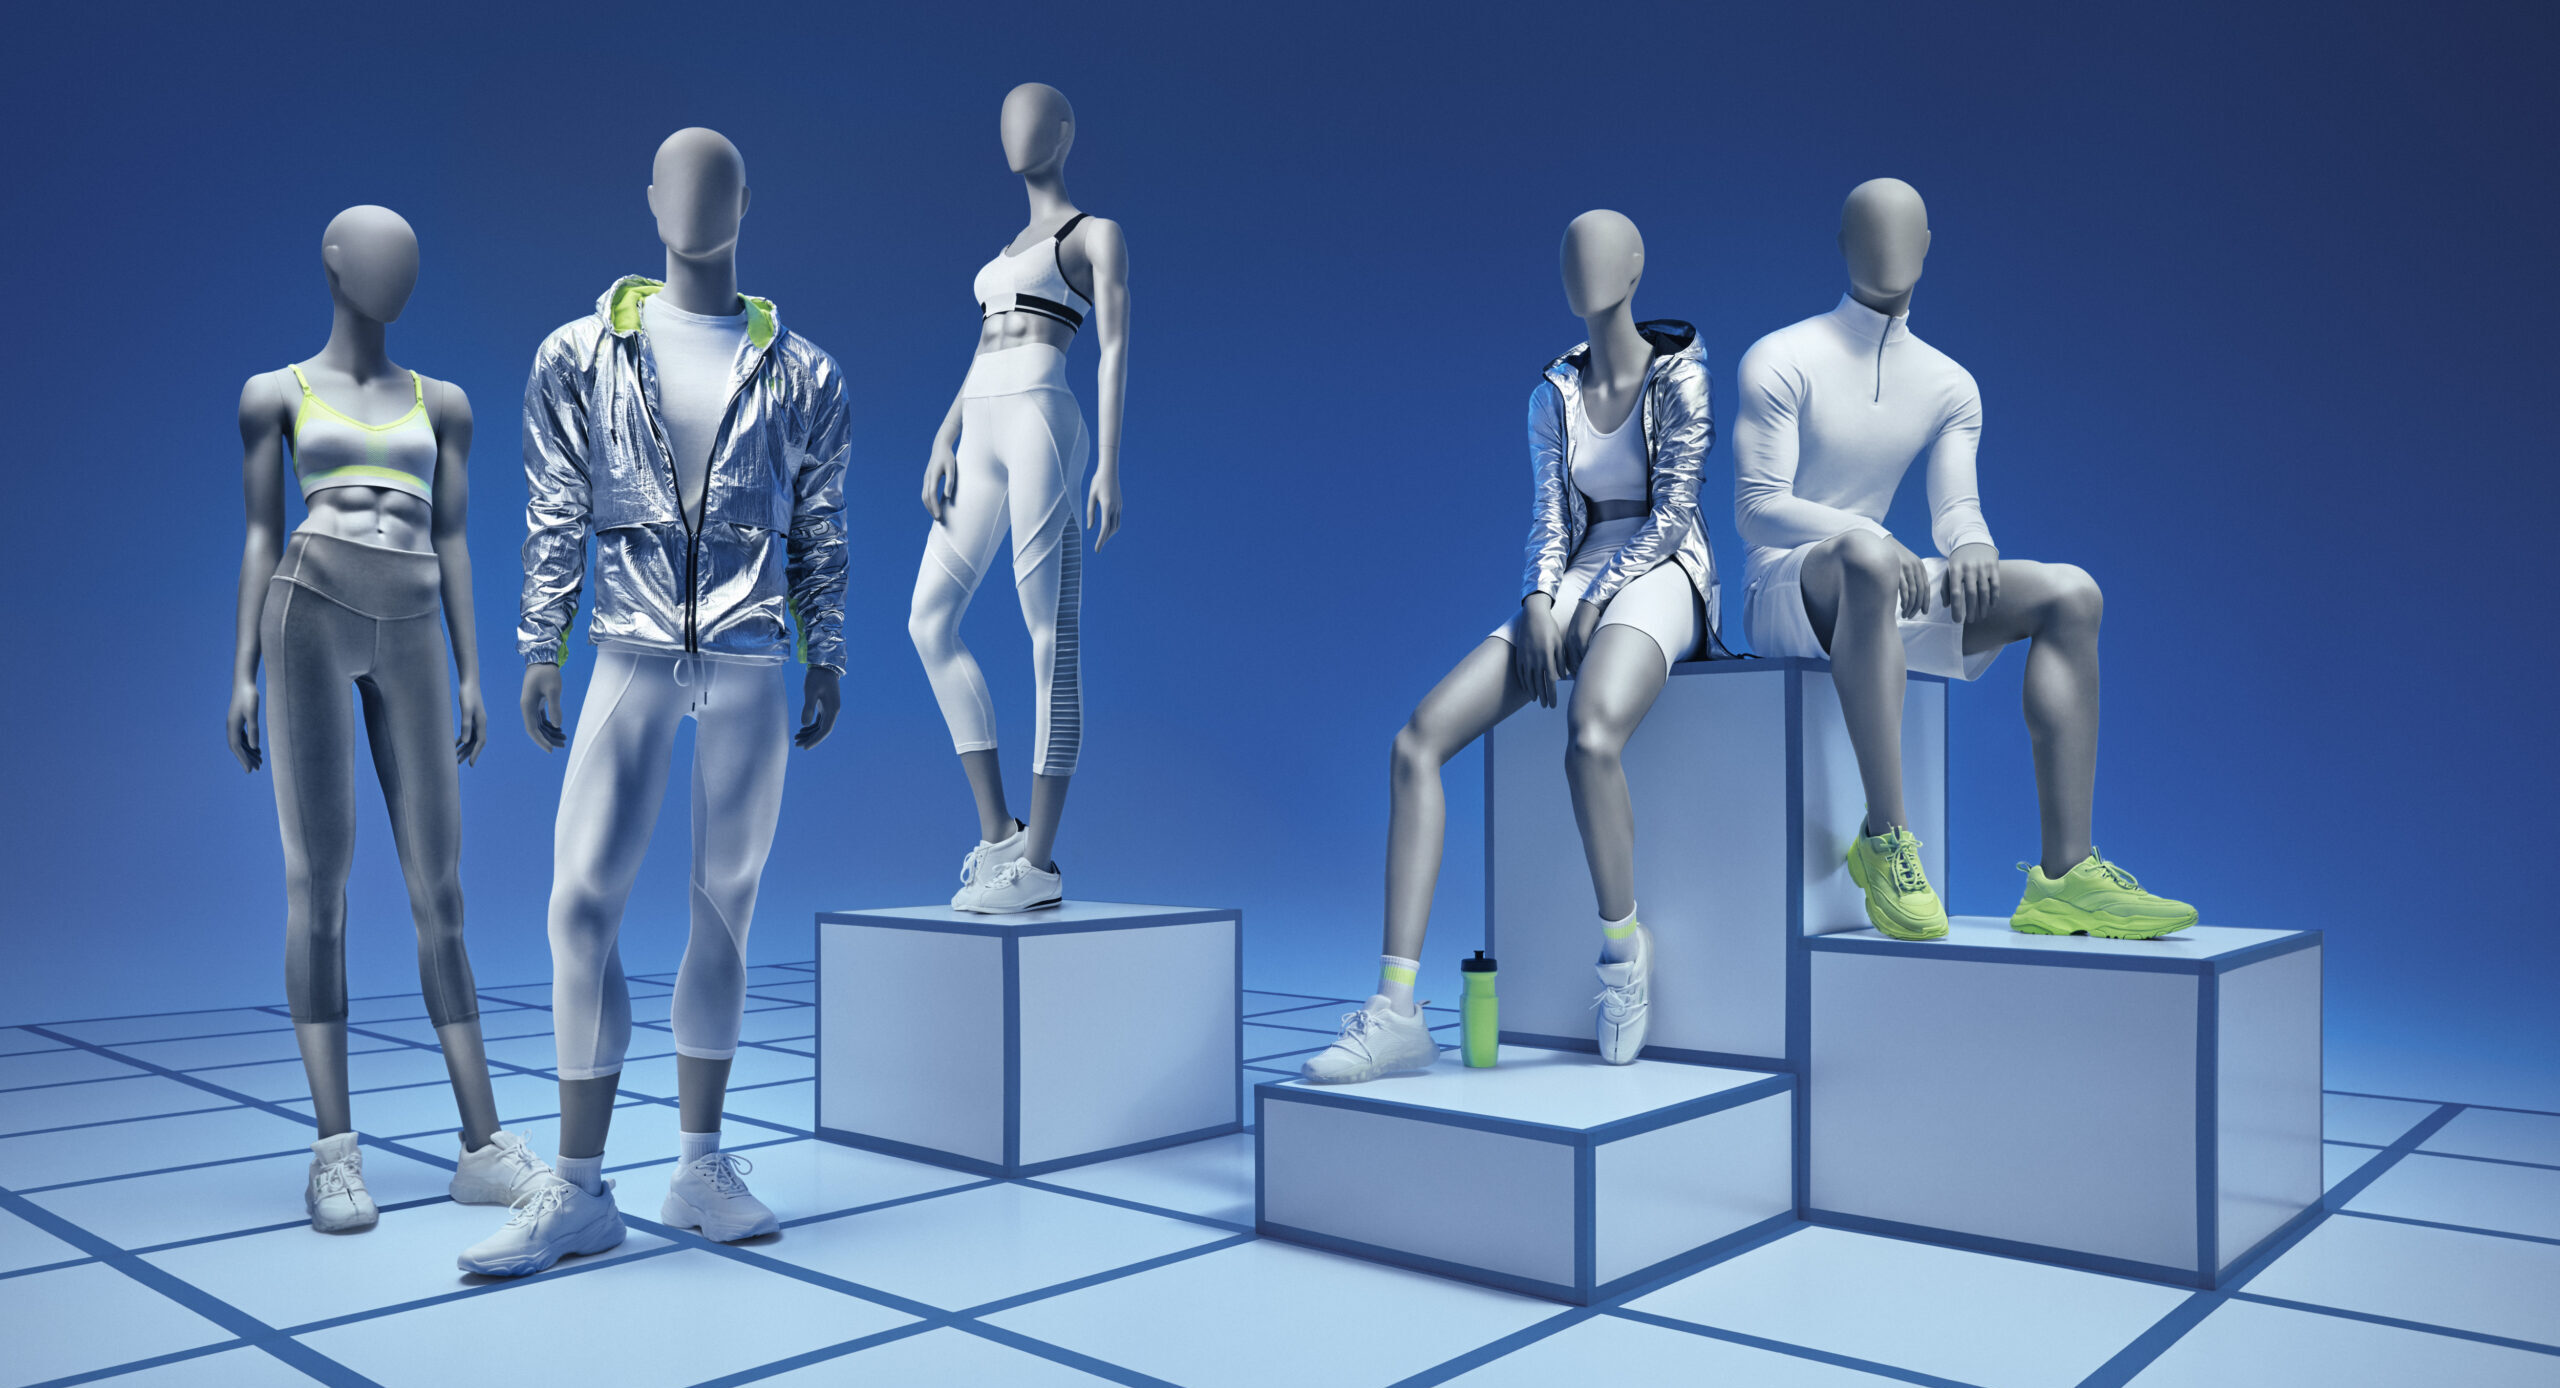 Sempere Mannequins launches a collection of sports and athletic